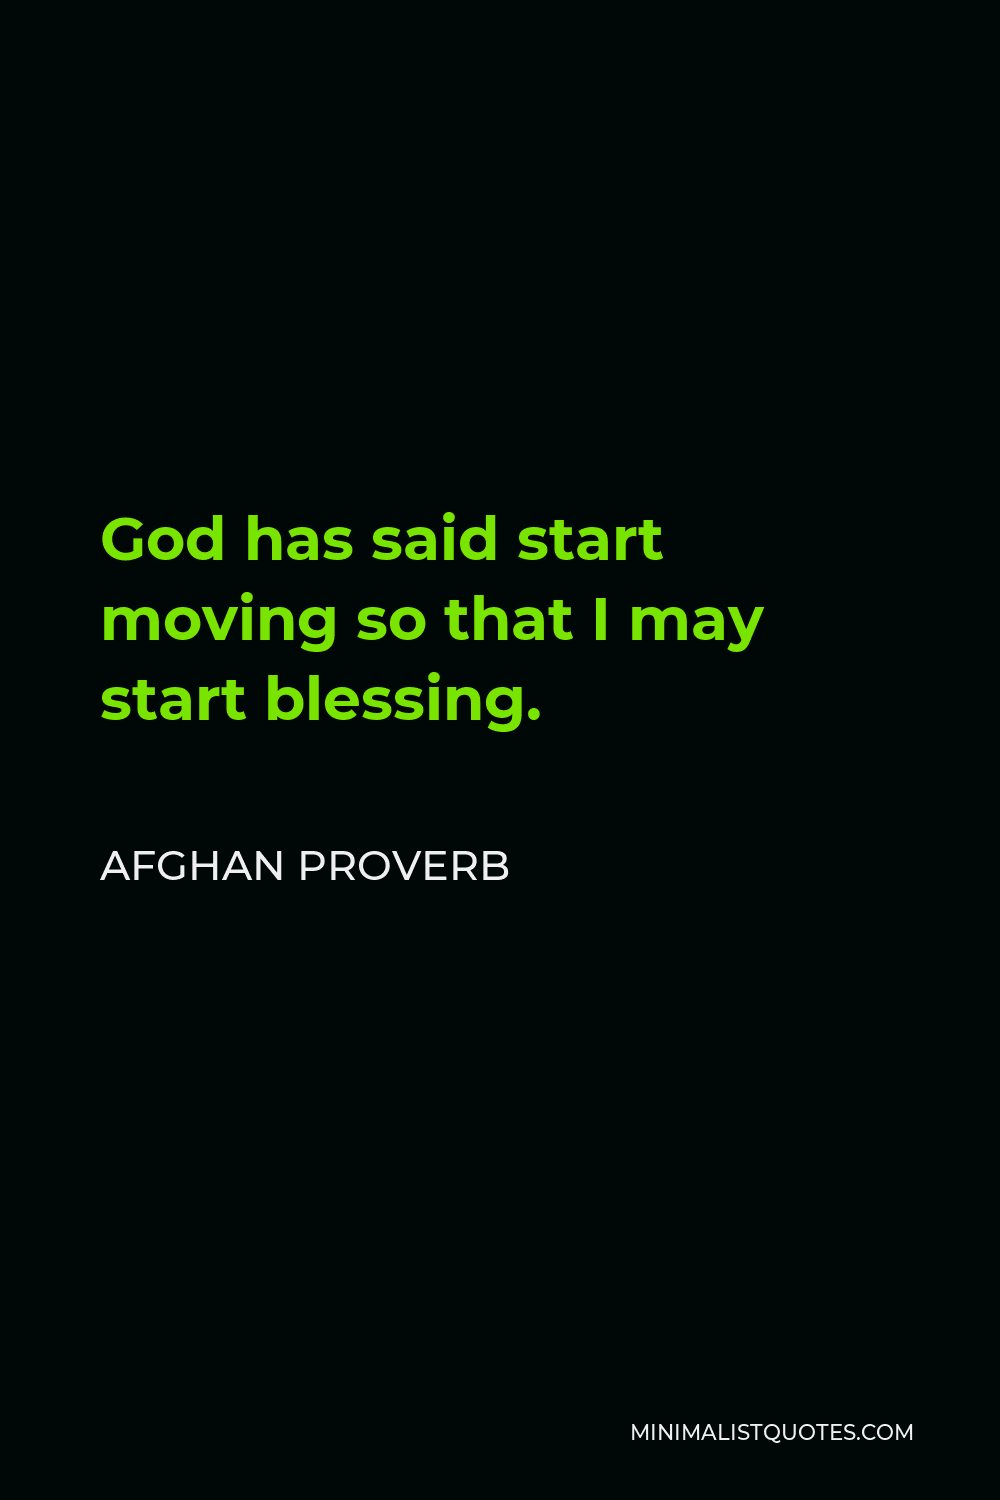 Afghan Proverb Quote - God has said start moving so that I may start blessing.